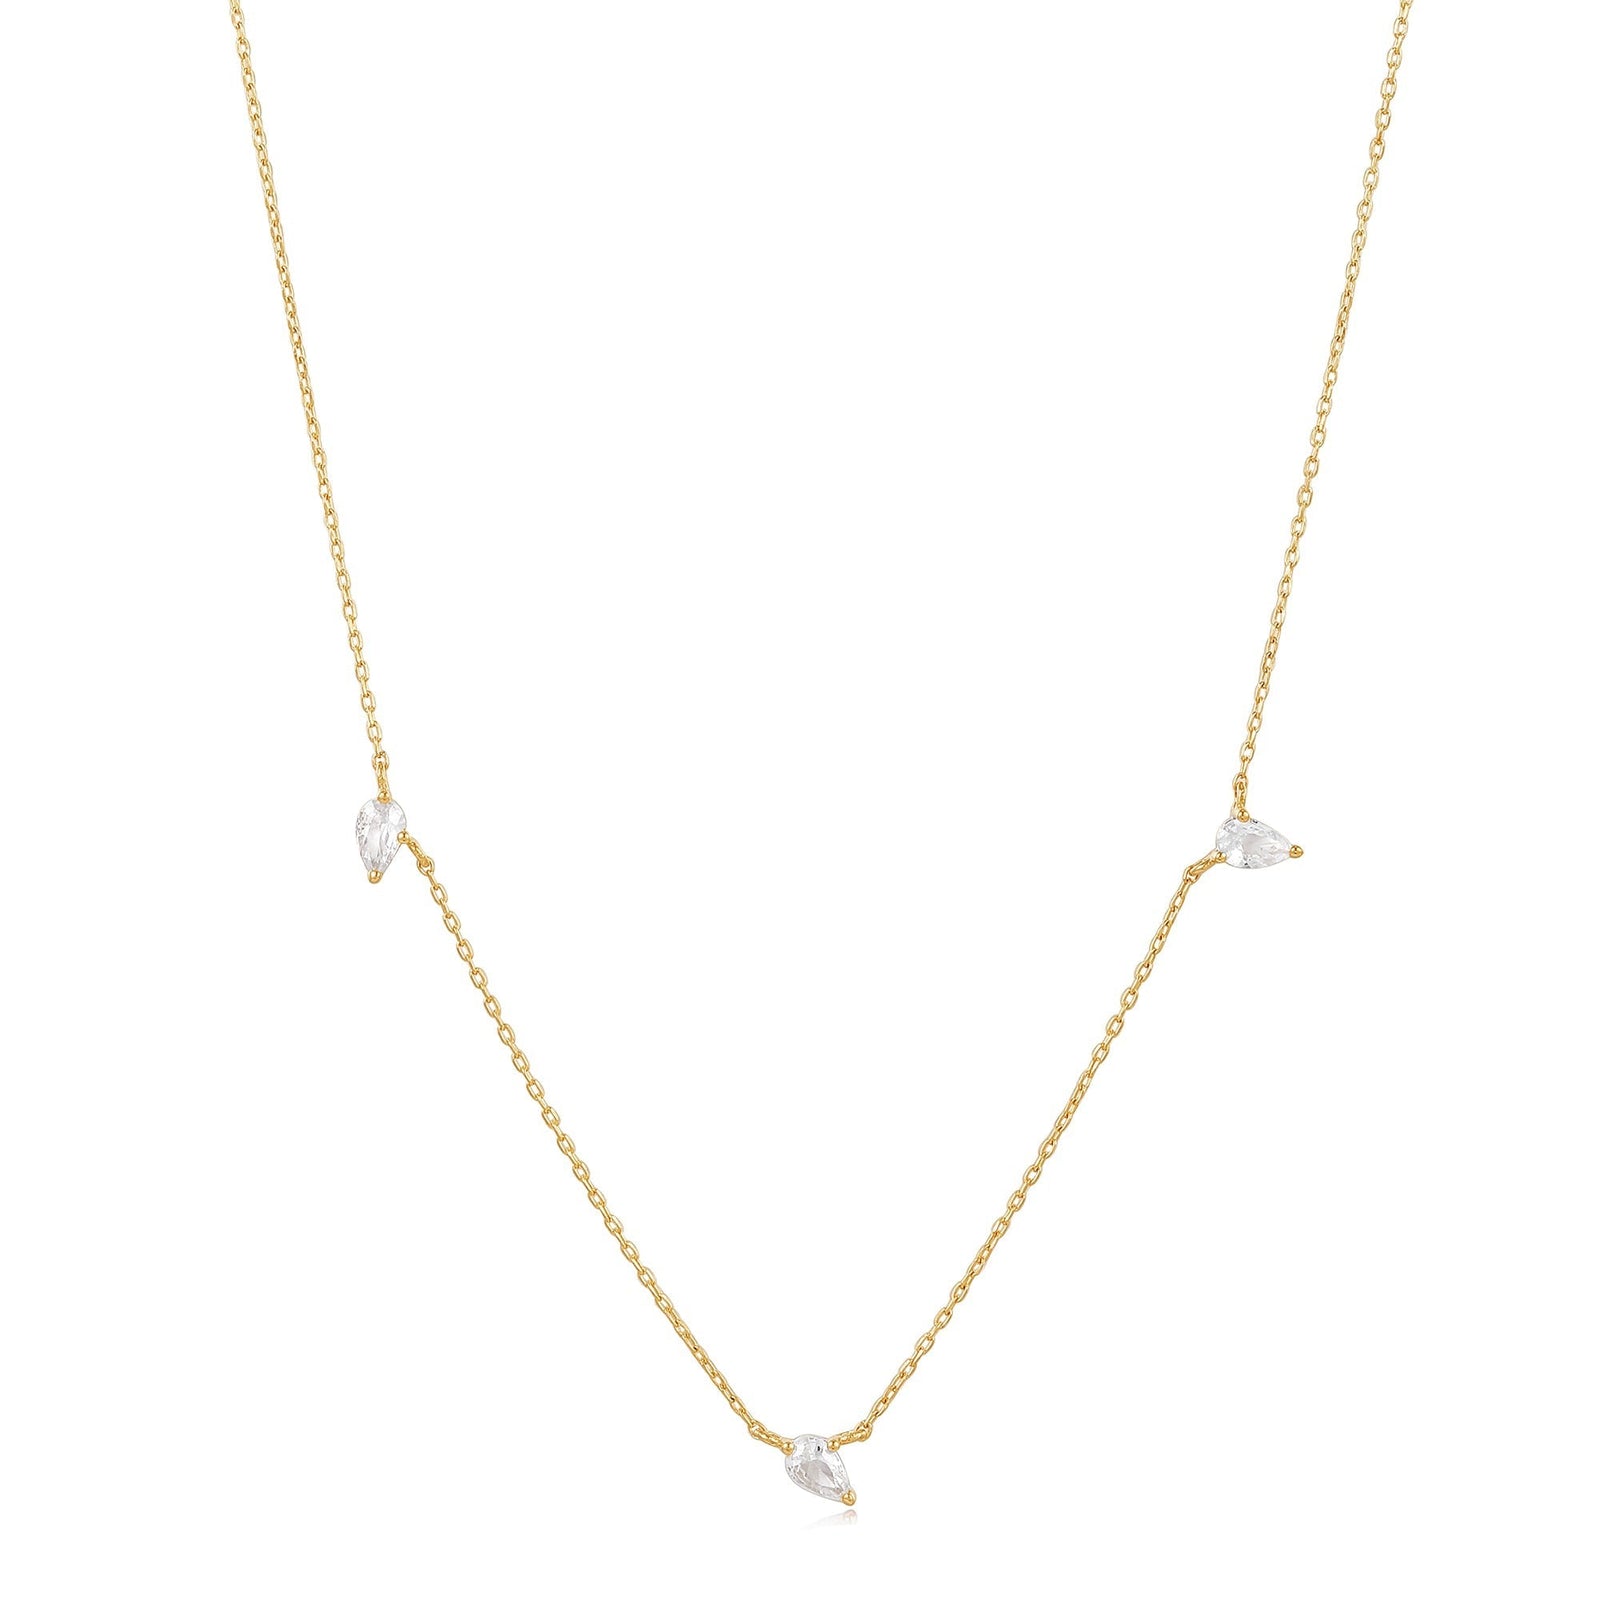 Ania Haie 14kt Gold White Sapphire Drop Necklace